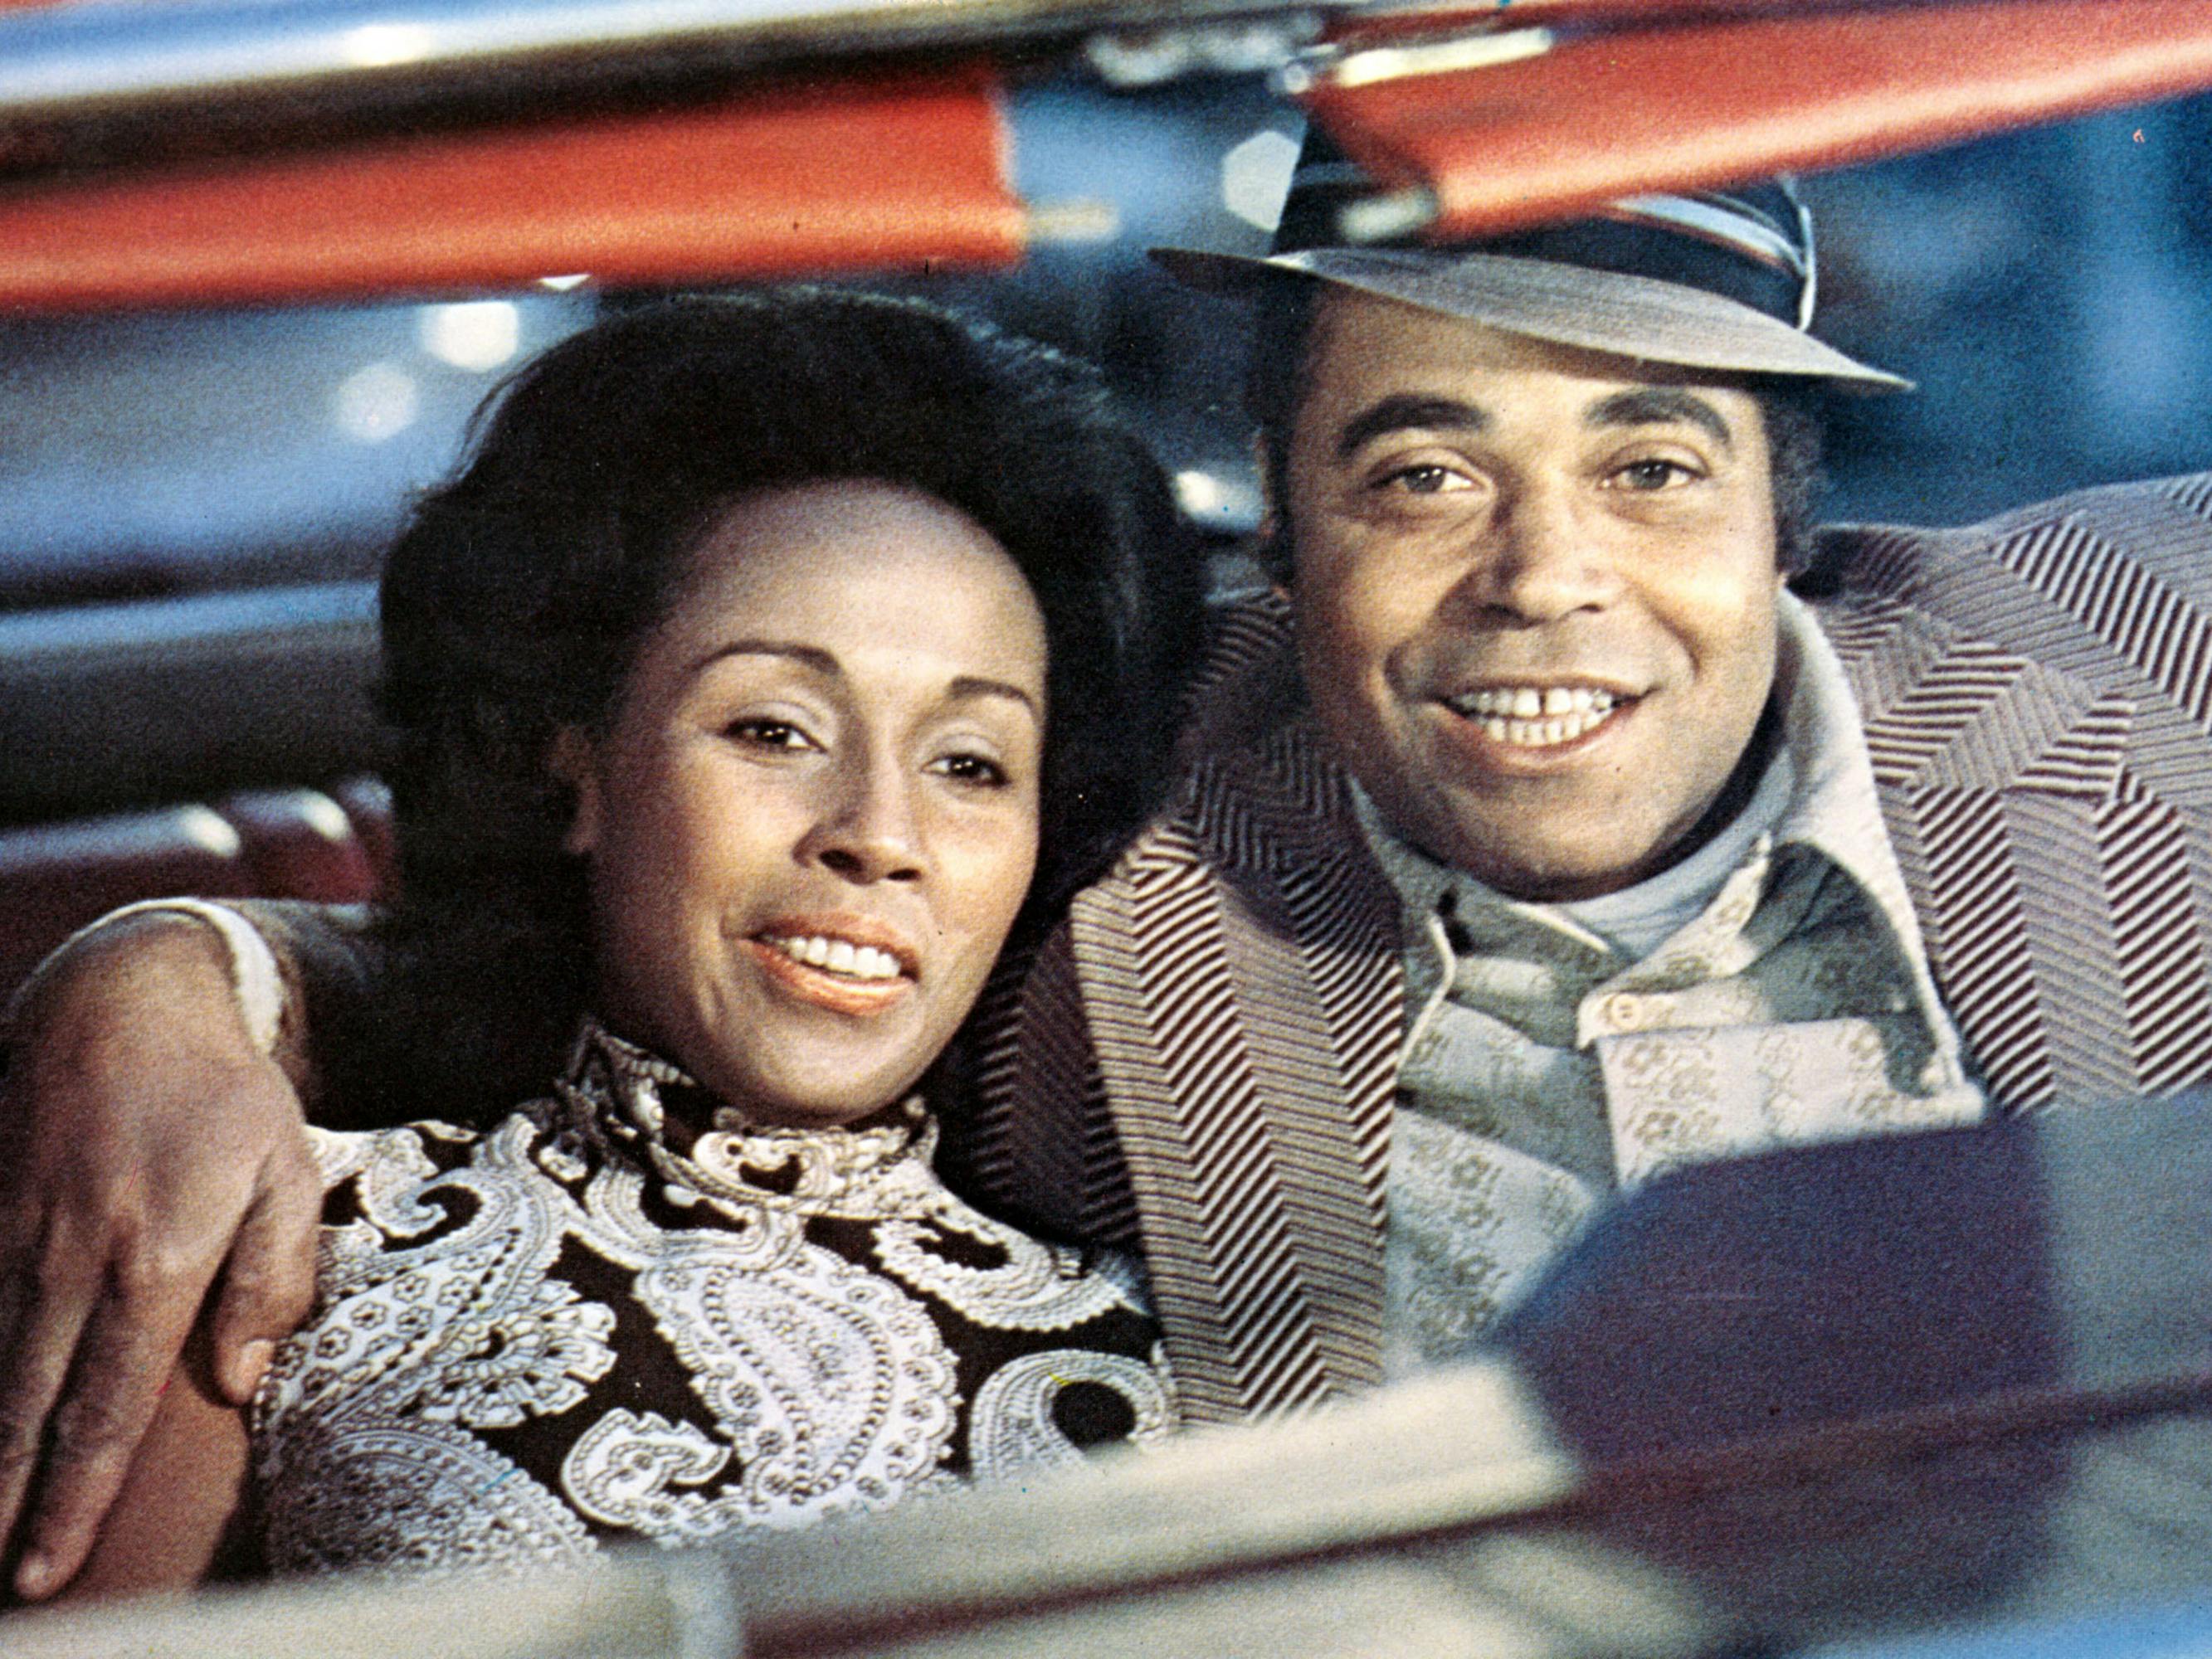 Claudine (Diahann Carroll) and Roop (James Earl Jones) sit together smiling in a car.